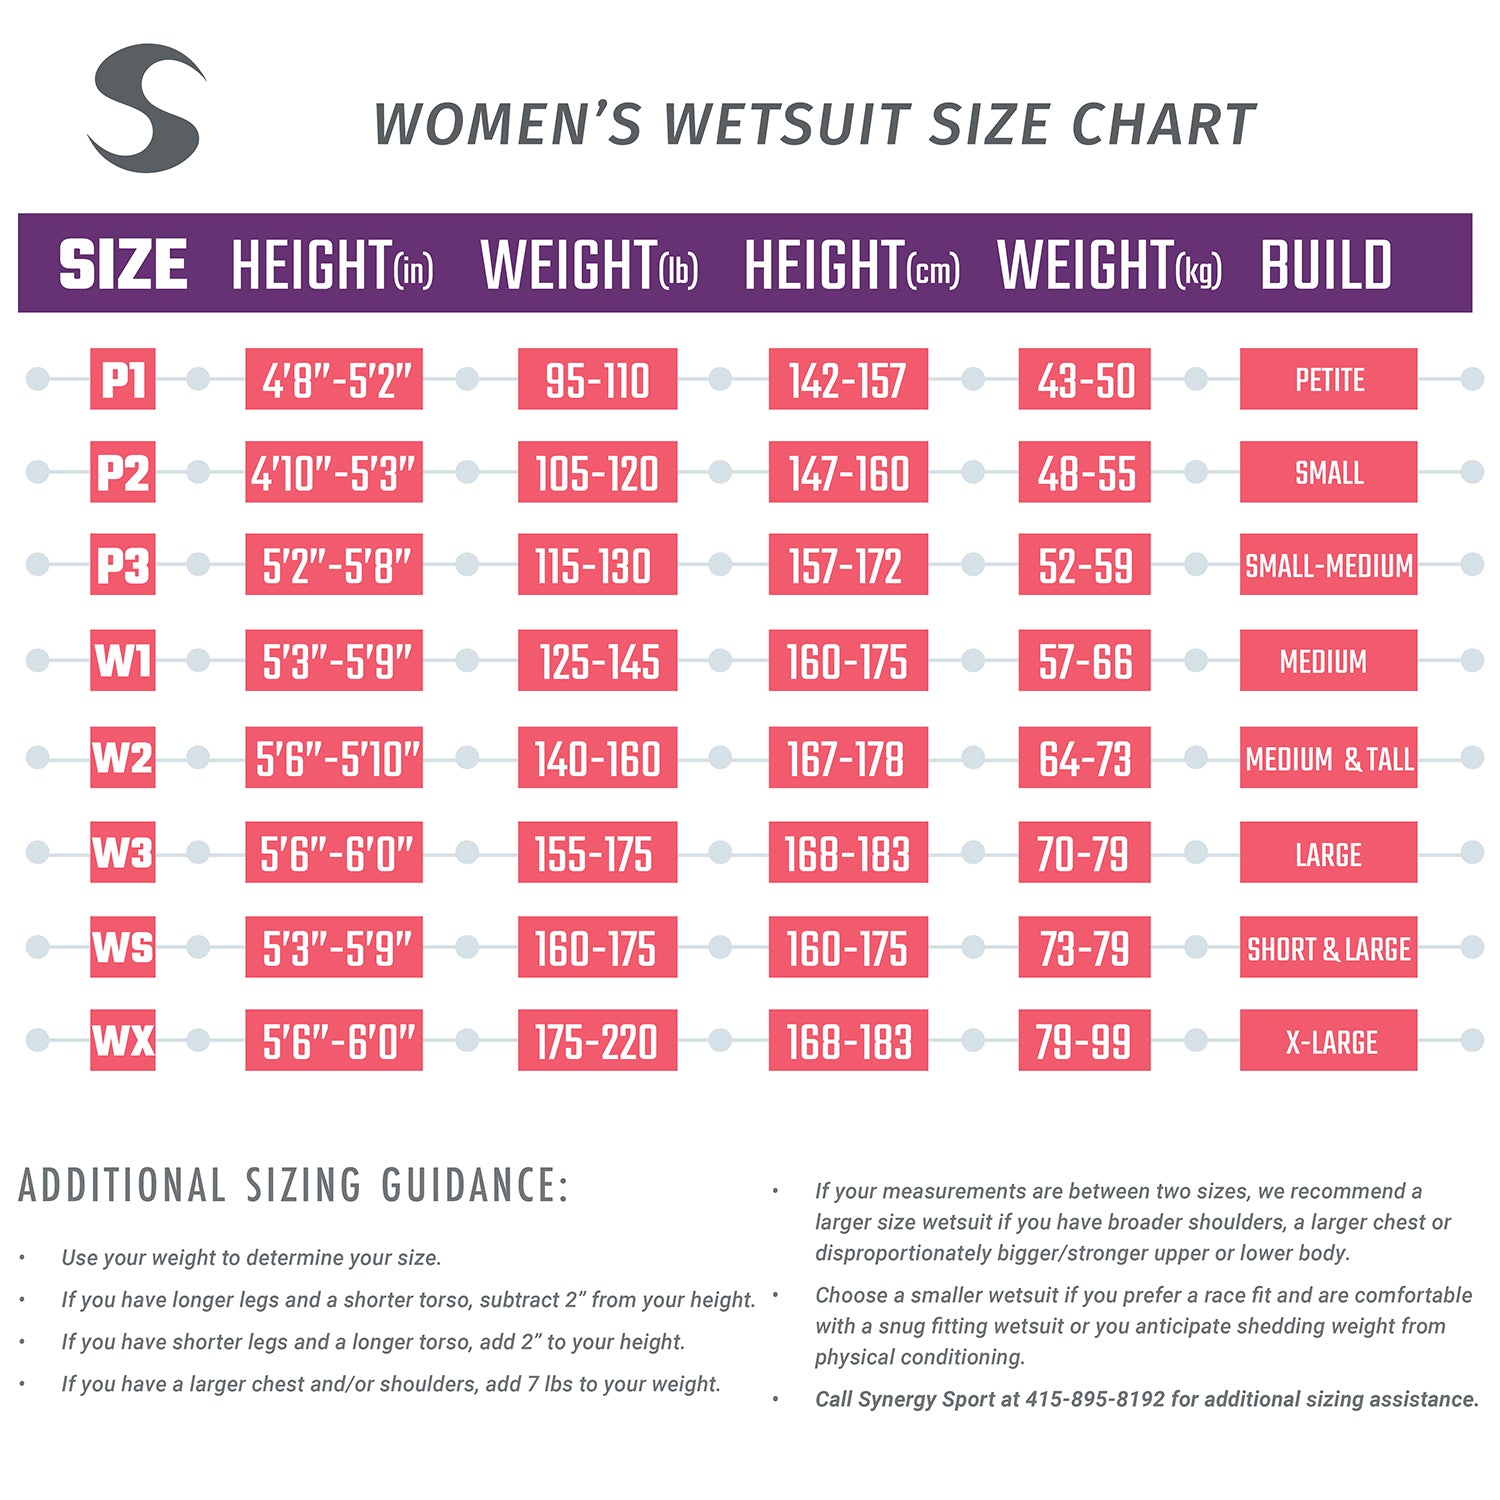 Women's Wetsuit Size chart - Synergy Wetsuits